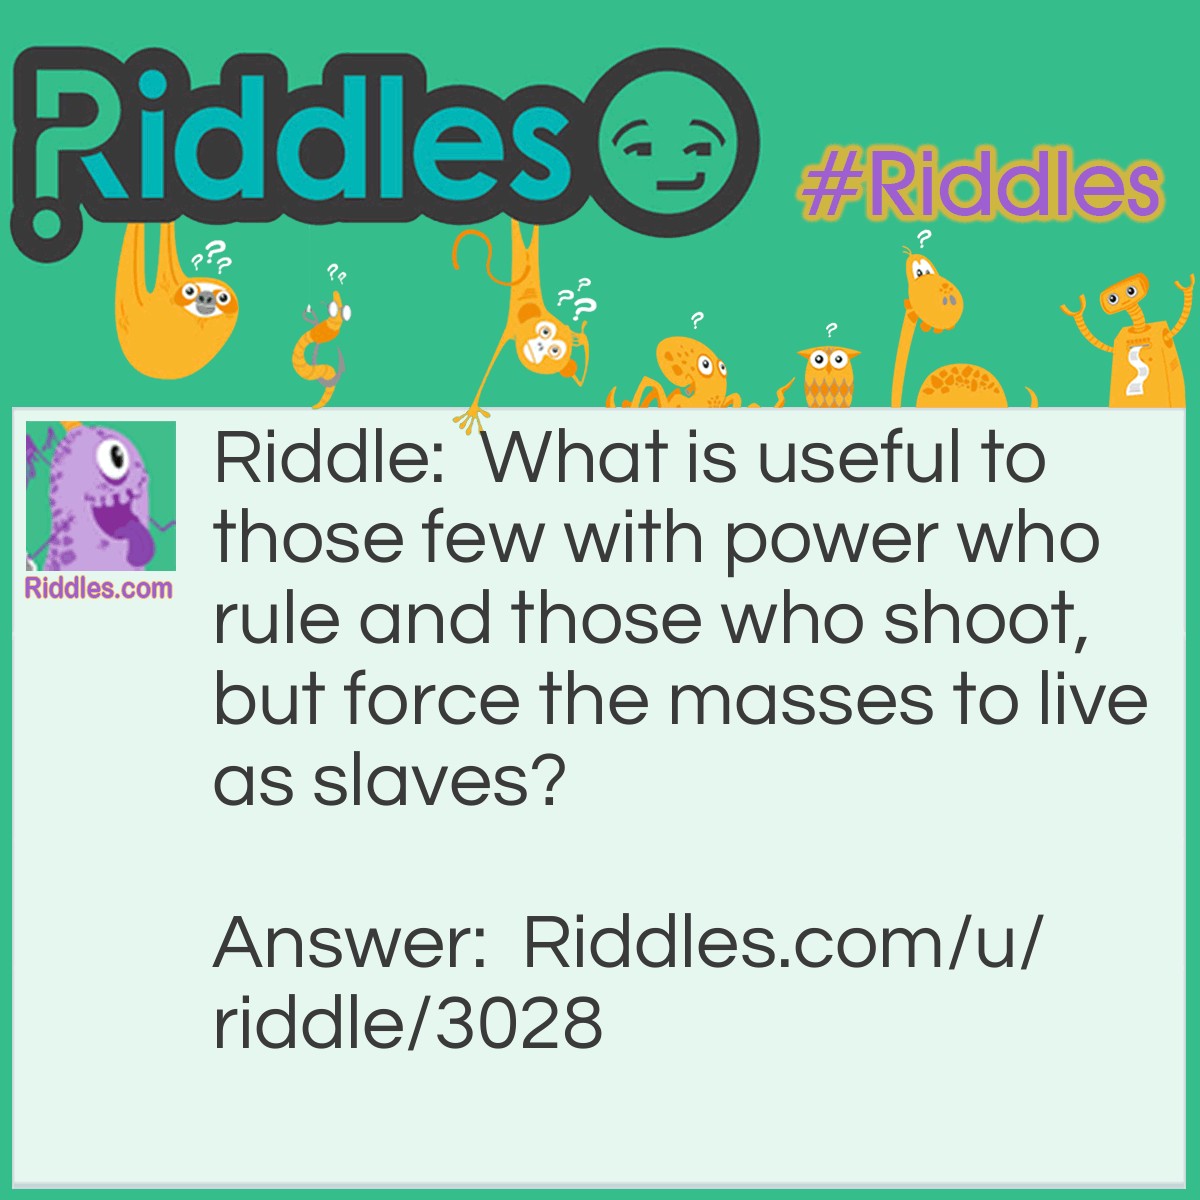 Riddle: What is useful to those few with power who rule and those who shoot, but force the masses to live as slaves? Answer: Laws.